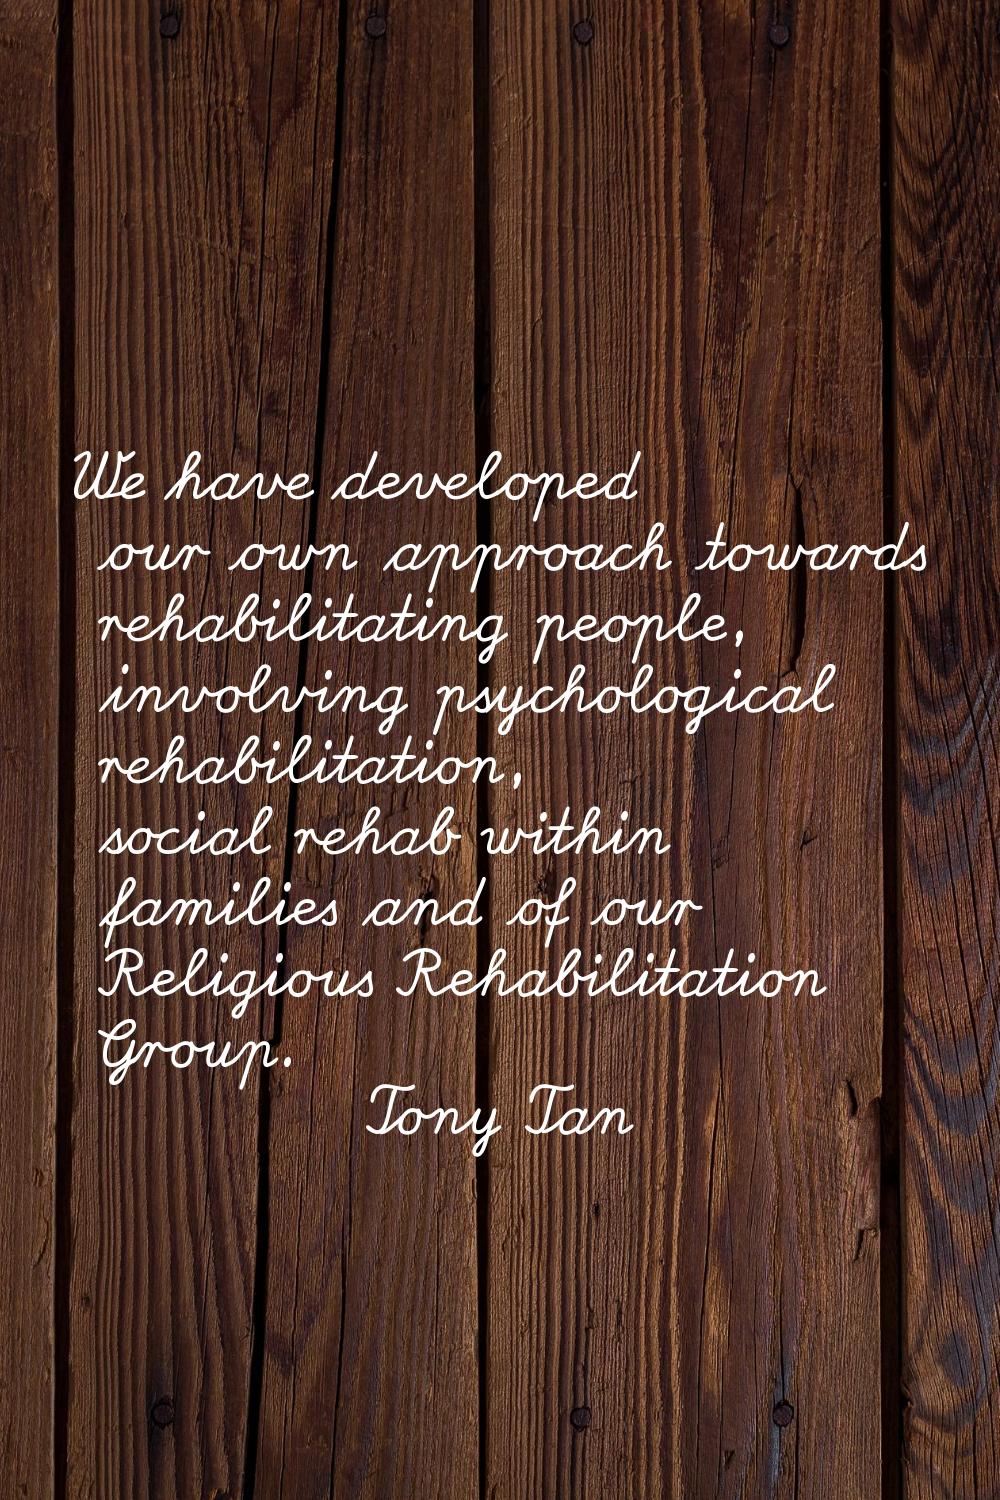 We have developed our own approach towards rehabilitating people, involving psychological rehabilit